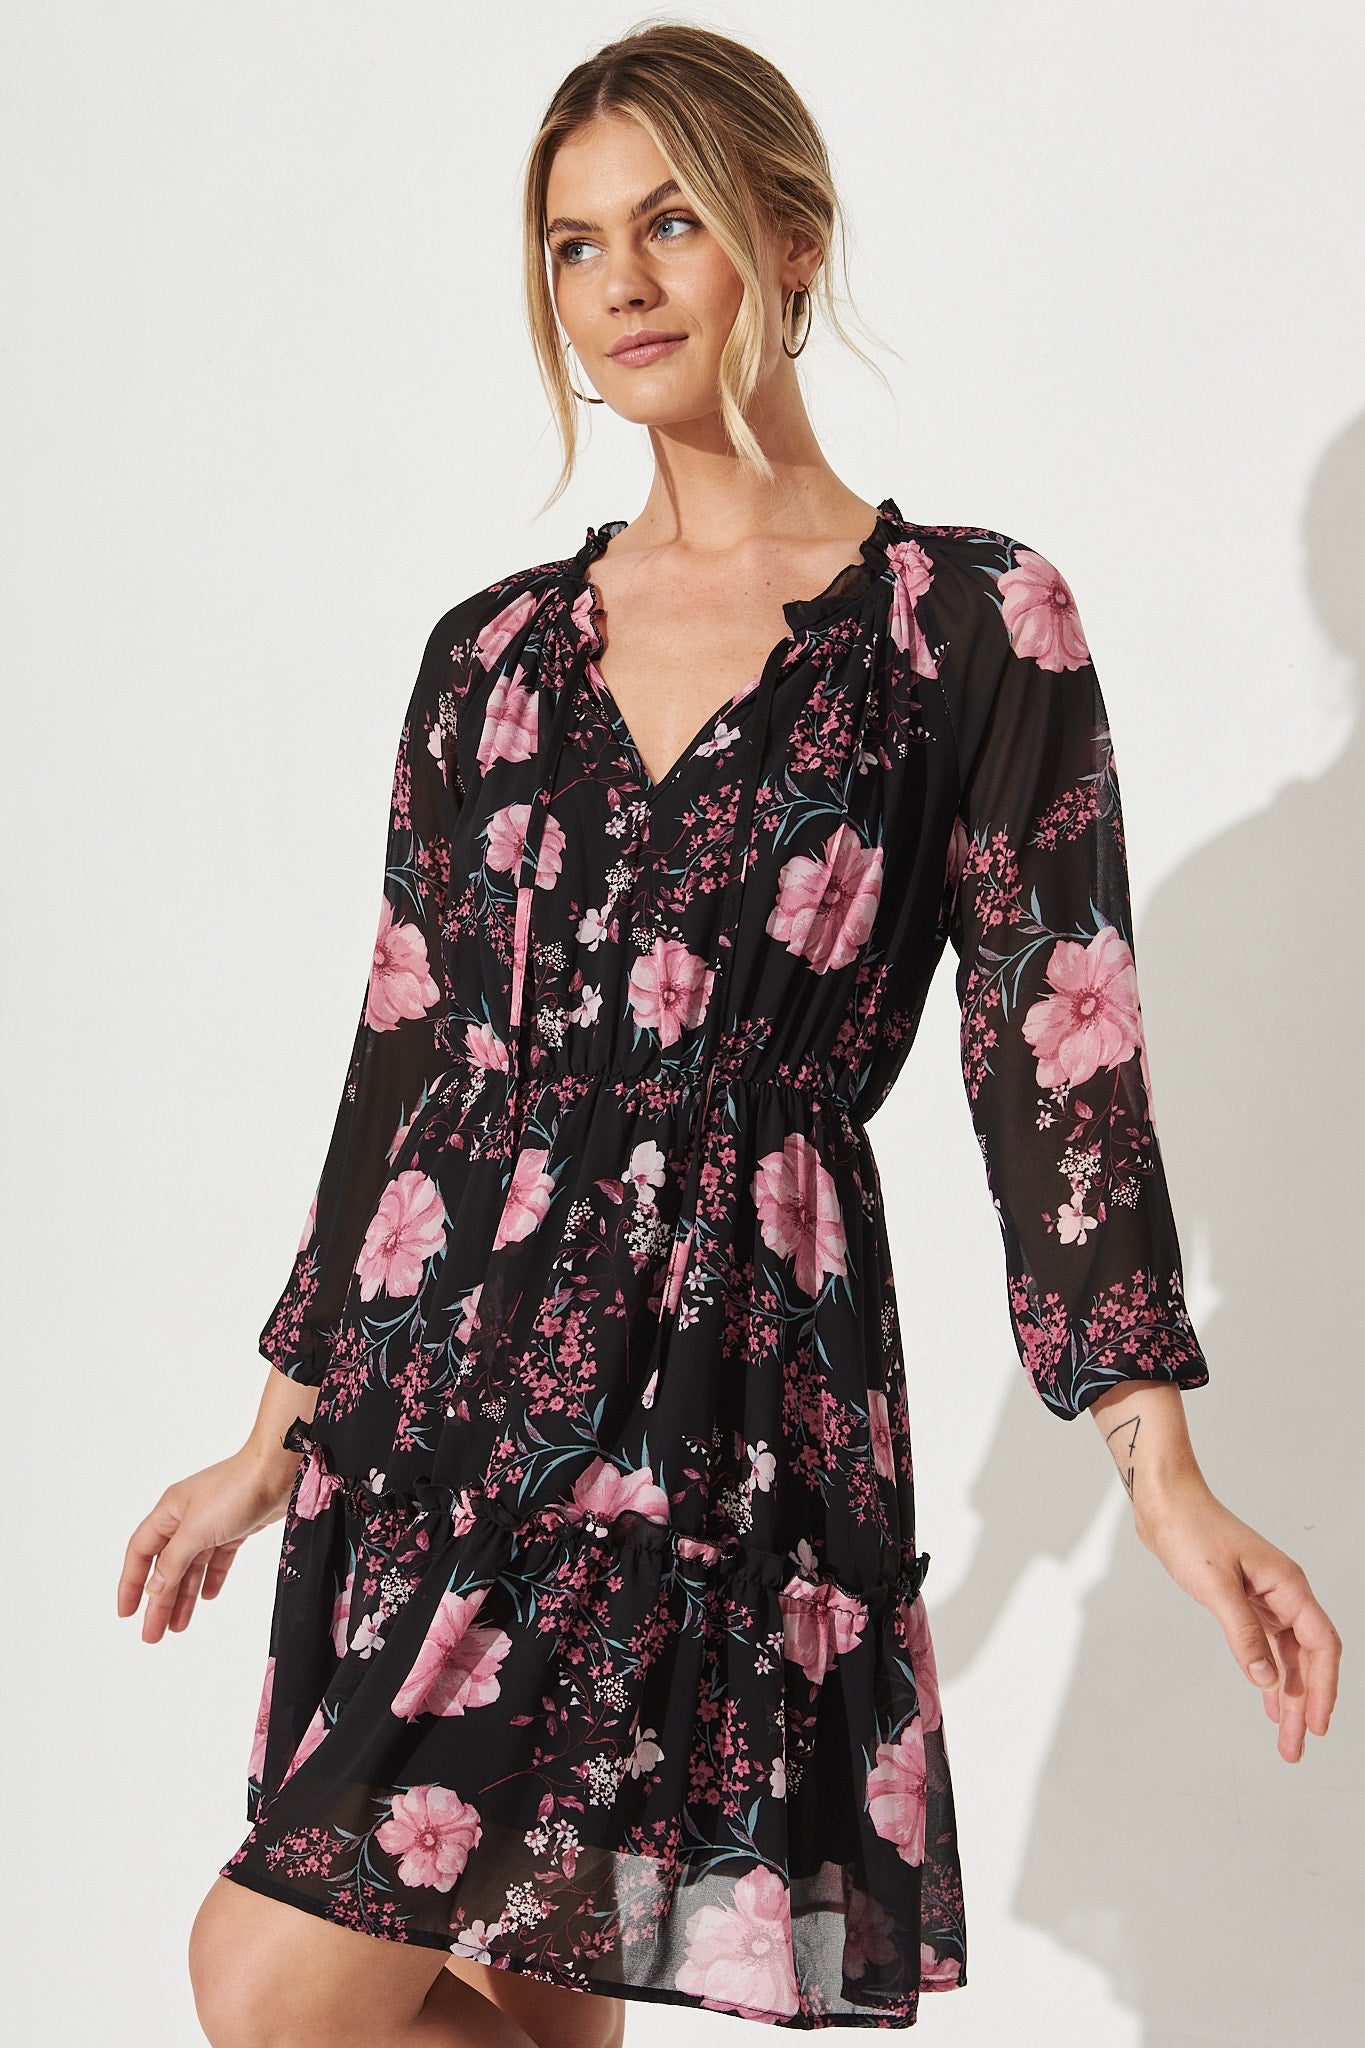 Roula Dress in Black with Purple Floral Chiffon - Front